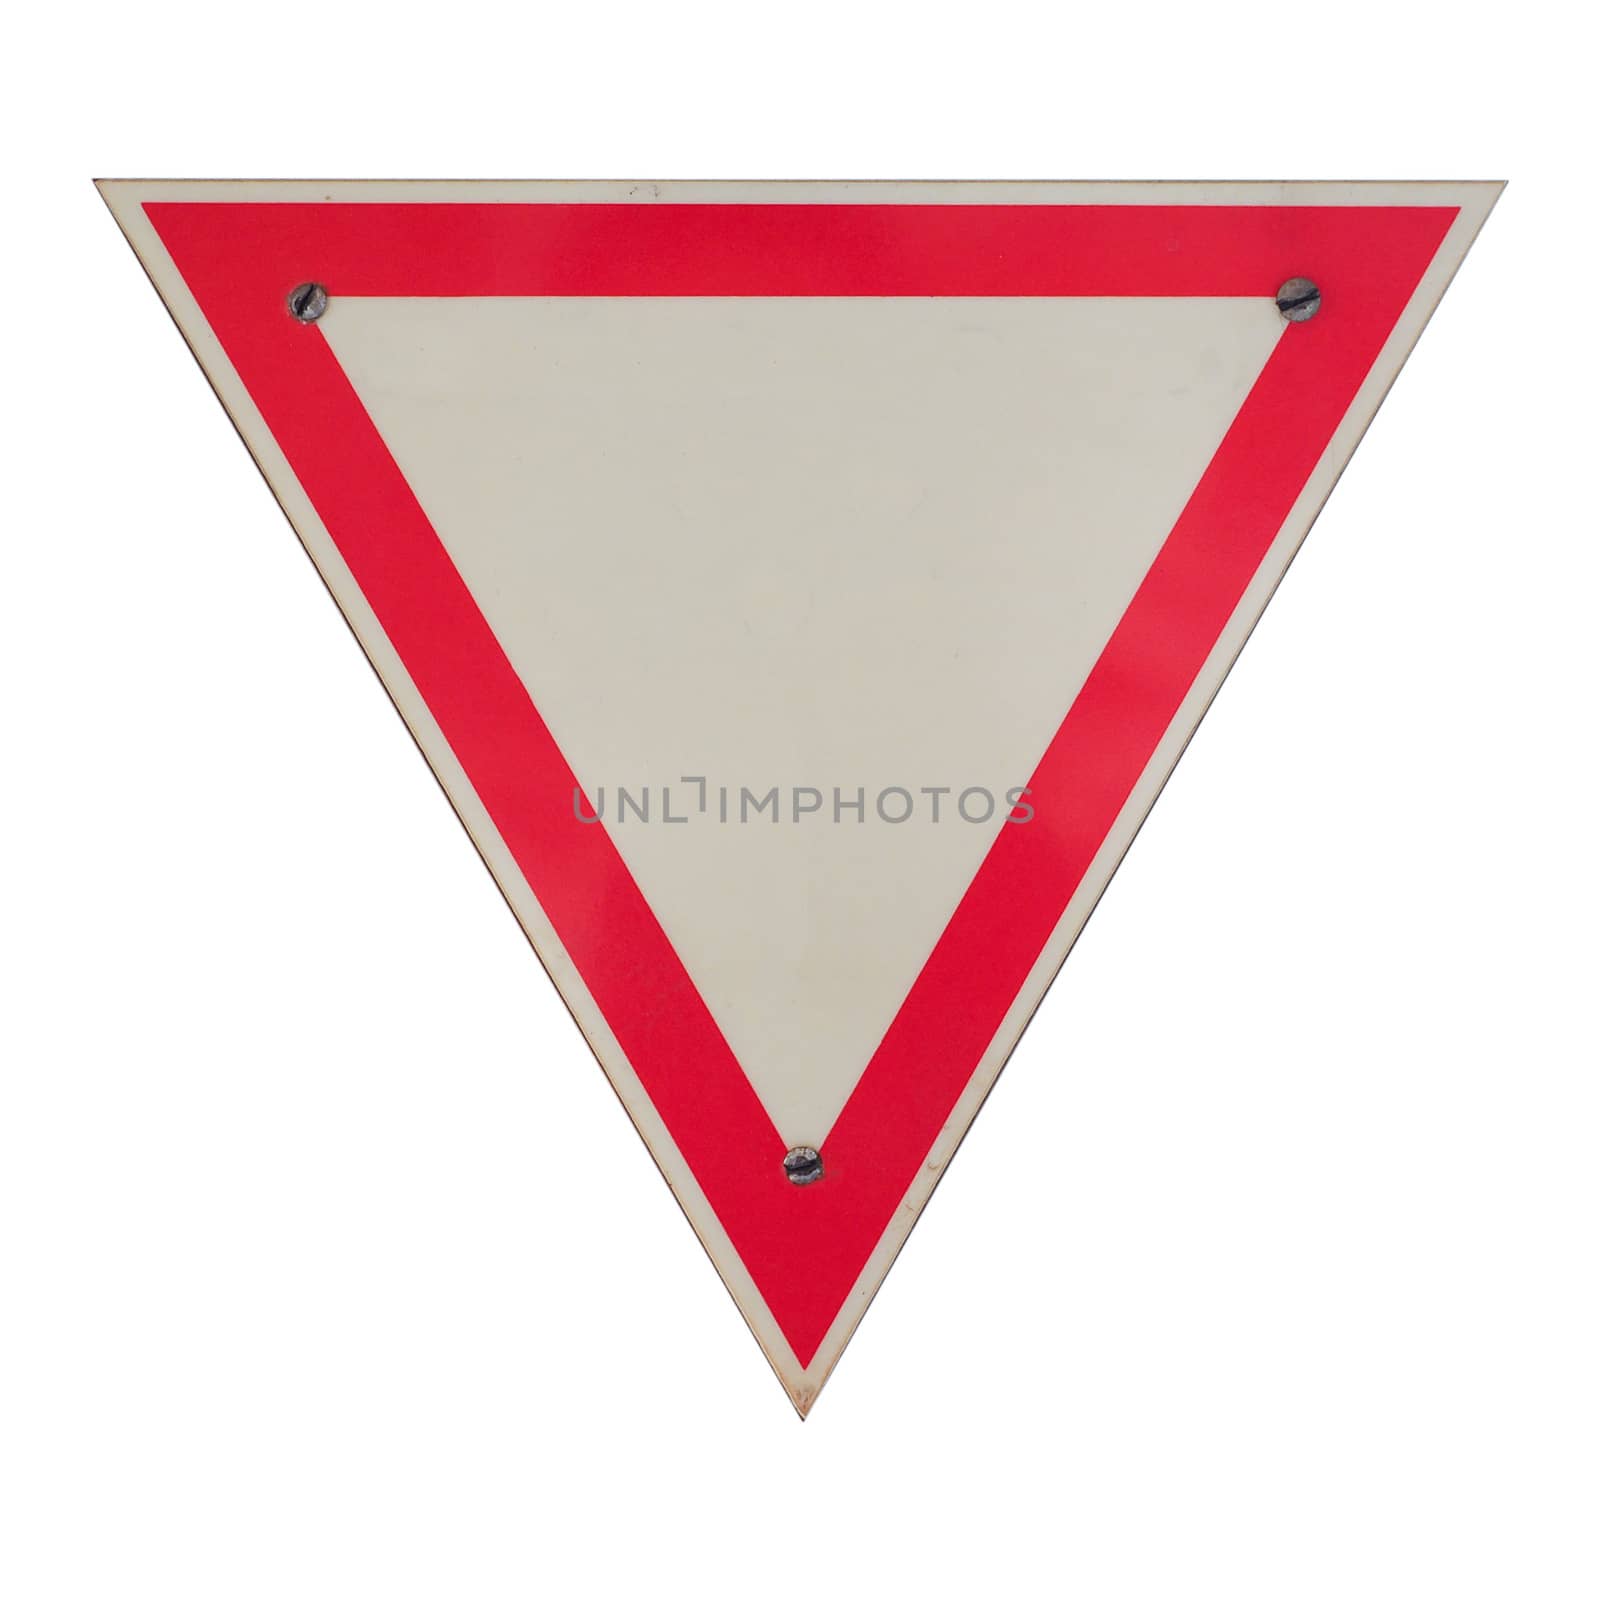 give way (yield) sign isolated over white by claudiodivizia